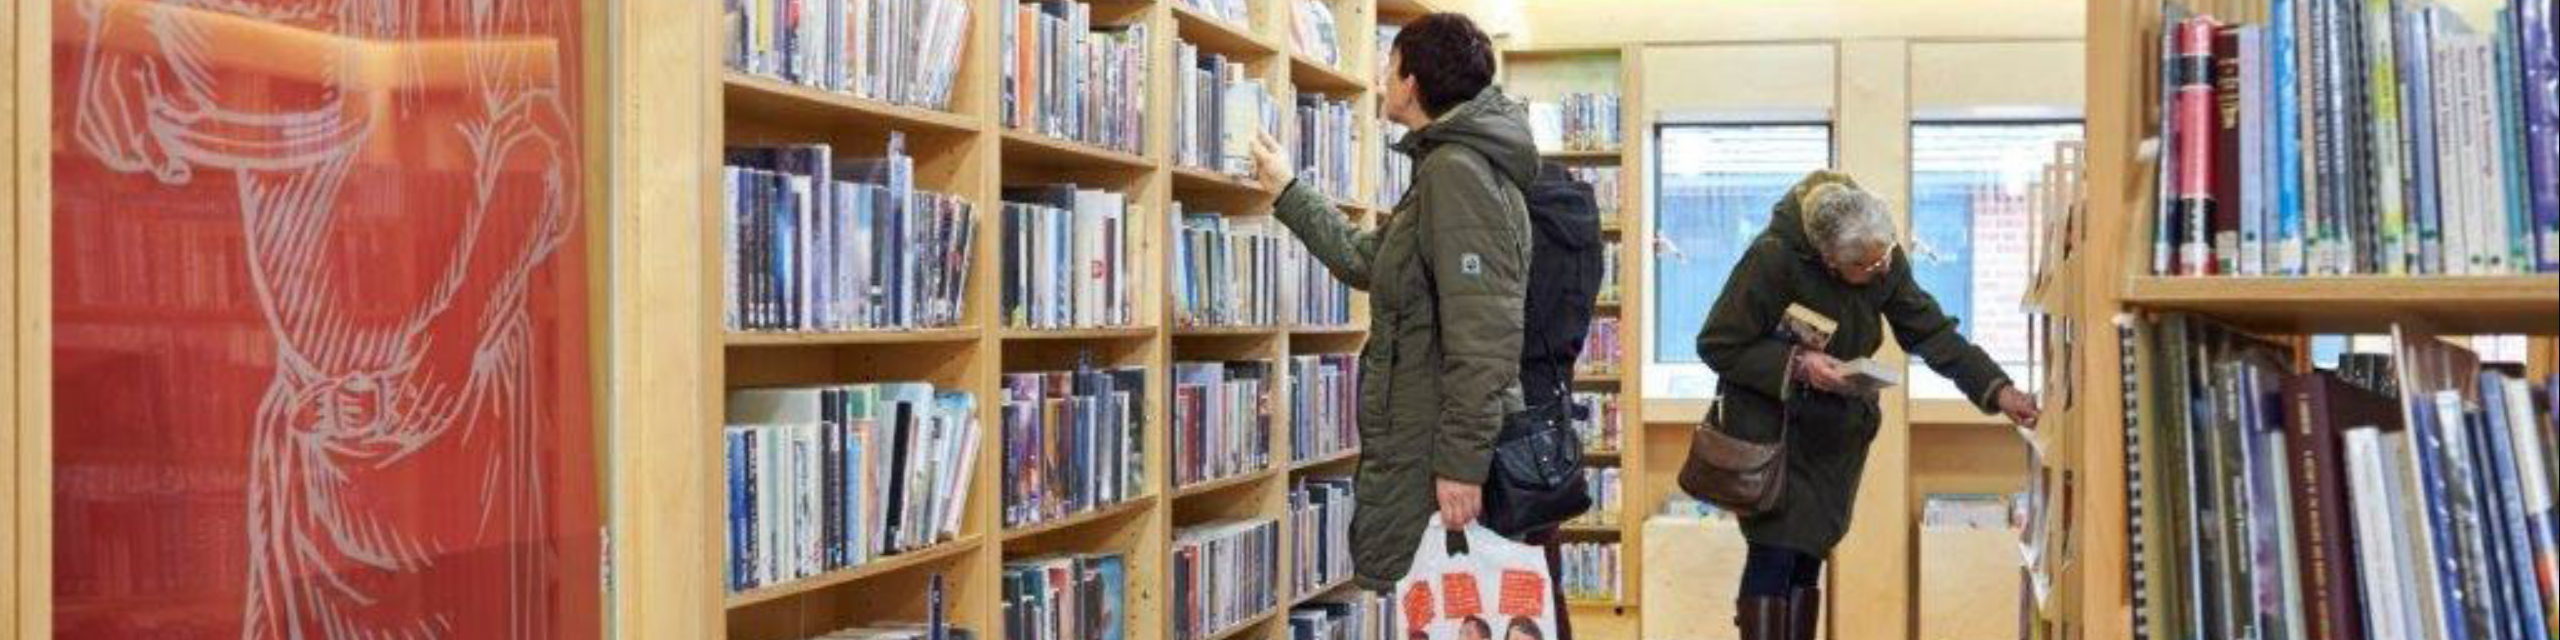 Adults browsing library bookshelves